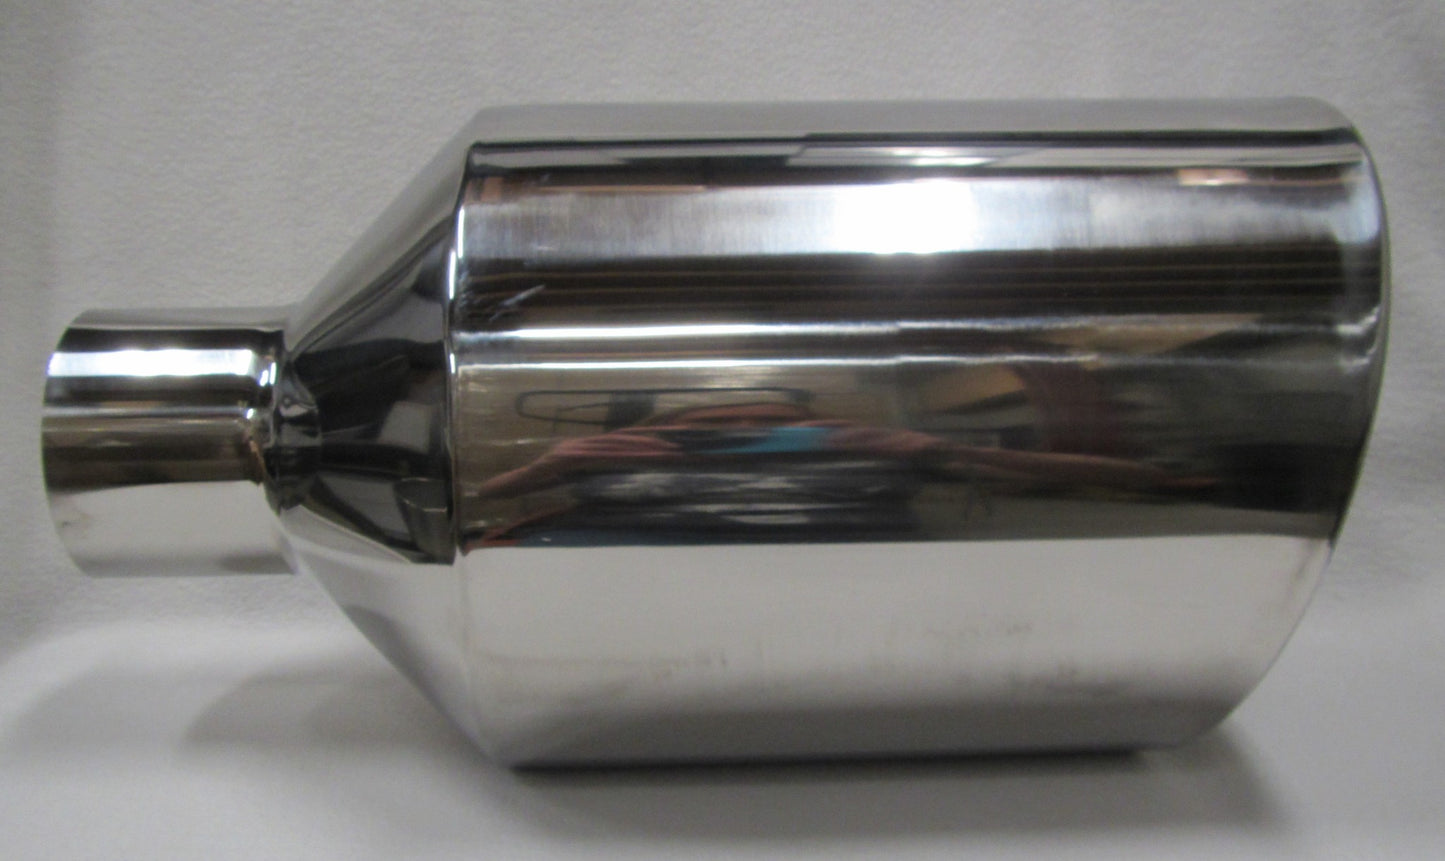 CHEVY DURAMAX 6.6L 5" IN x 10" OUT x 18" LONG POLISHED STAINLESS EXHAUST TIP